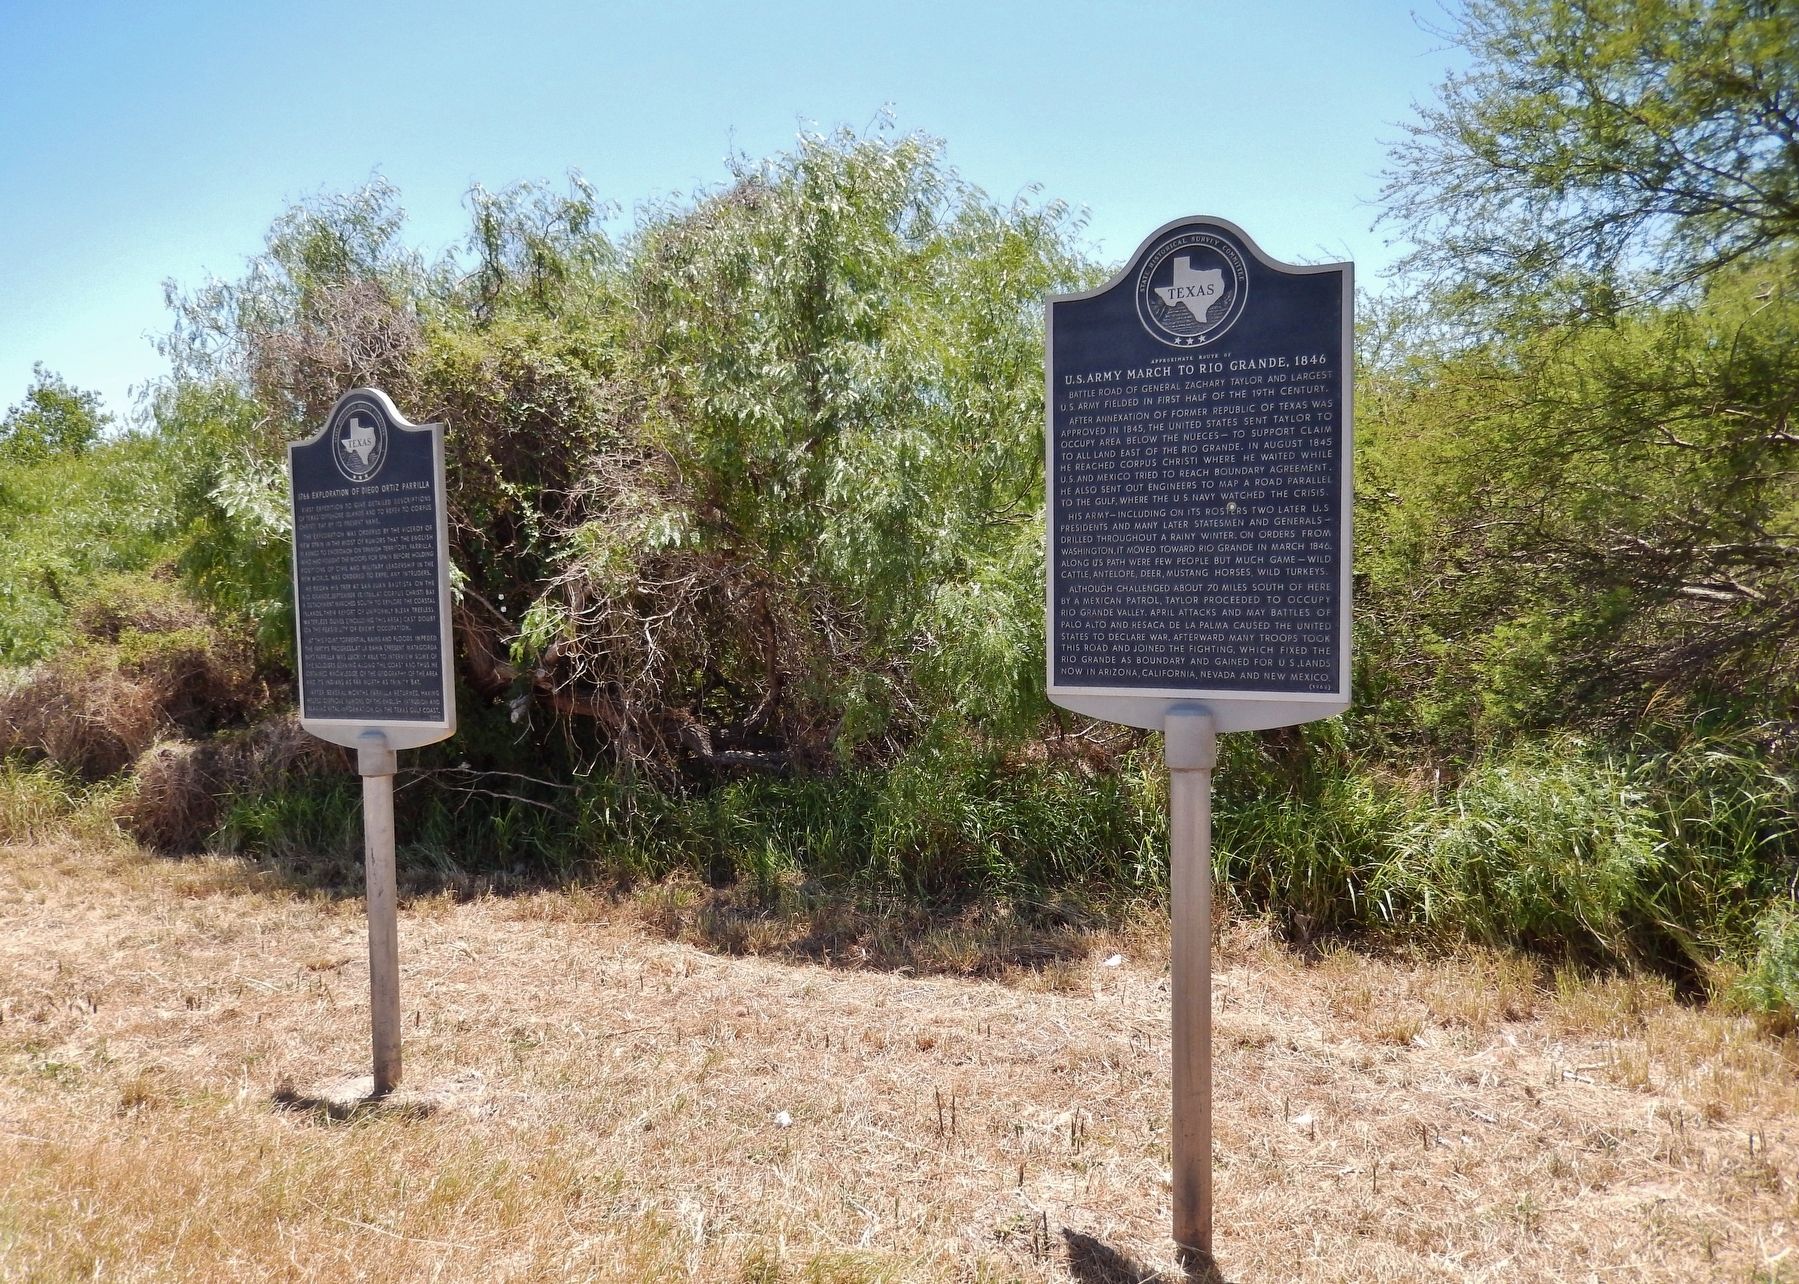 U.S. Army March to Rio Grande, 1846 Marker (<i>wide view; unrelated marker at left</i>) image. Click for full size.